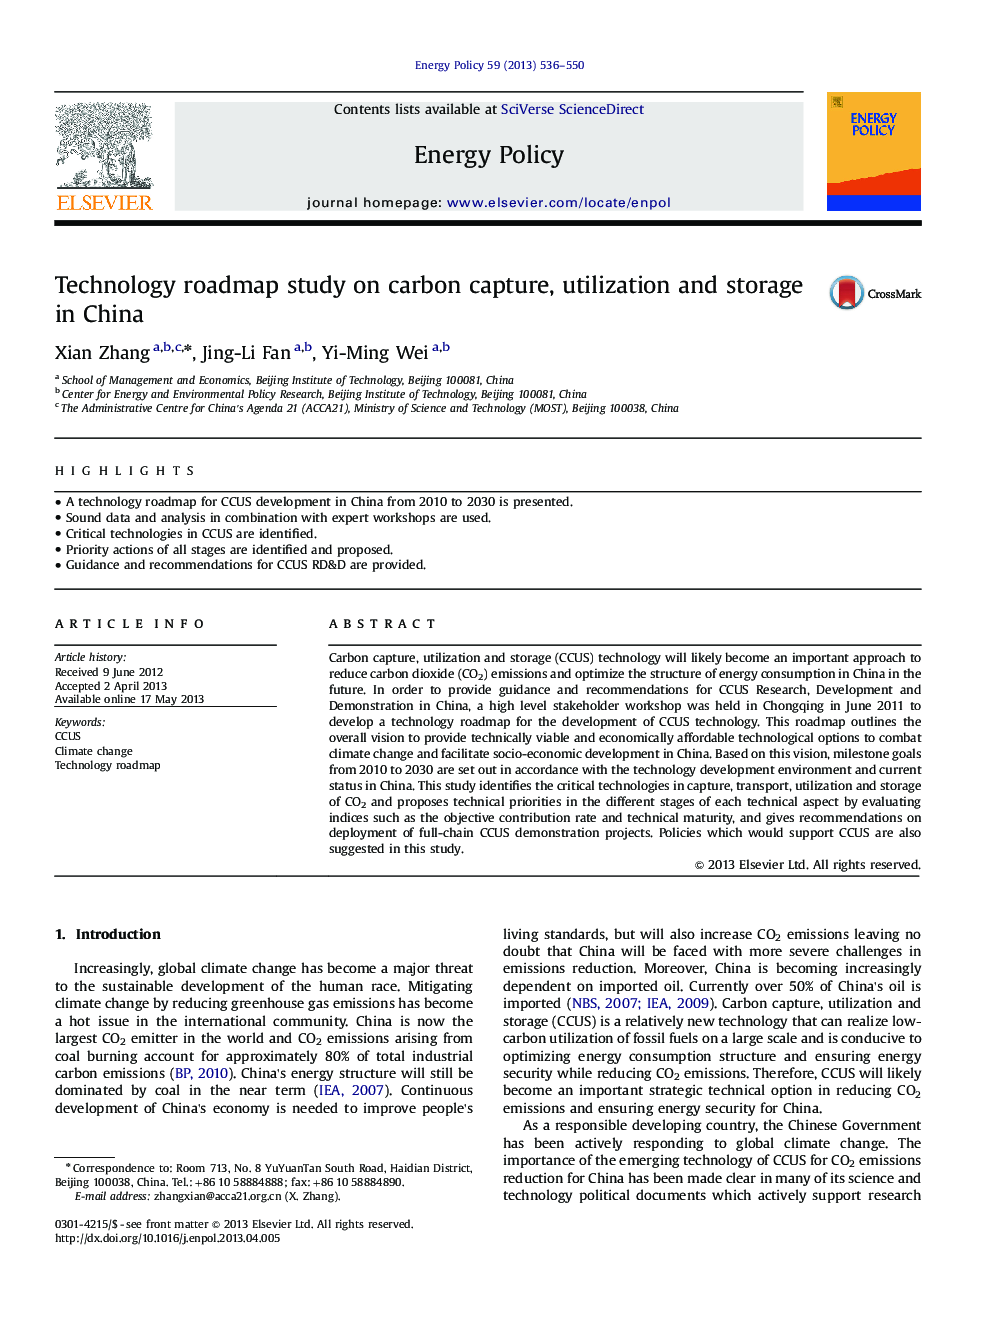 Technology roadmap study on carbon capture, utilization and storage in China